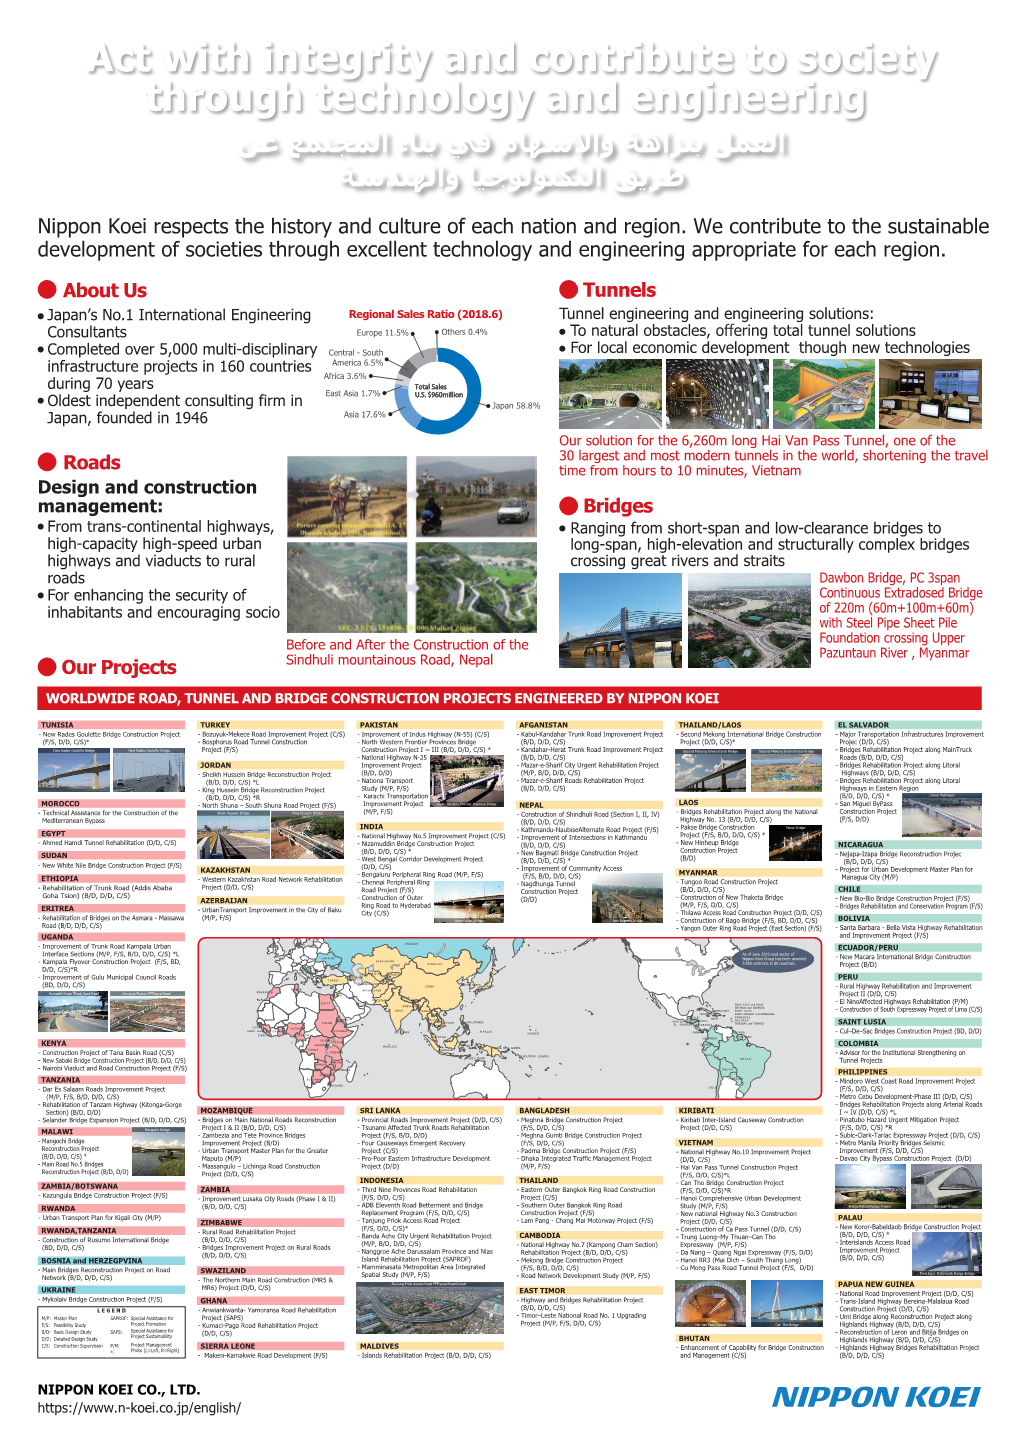 Worldwide Road, Tunnel and Bridge Construction Projects Engineered by Nippon Koei